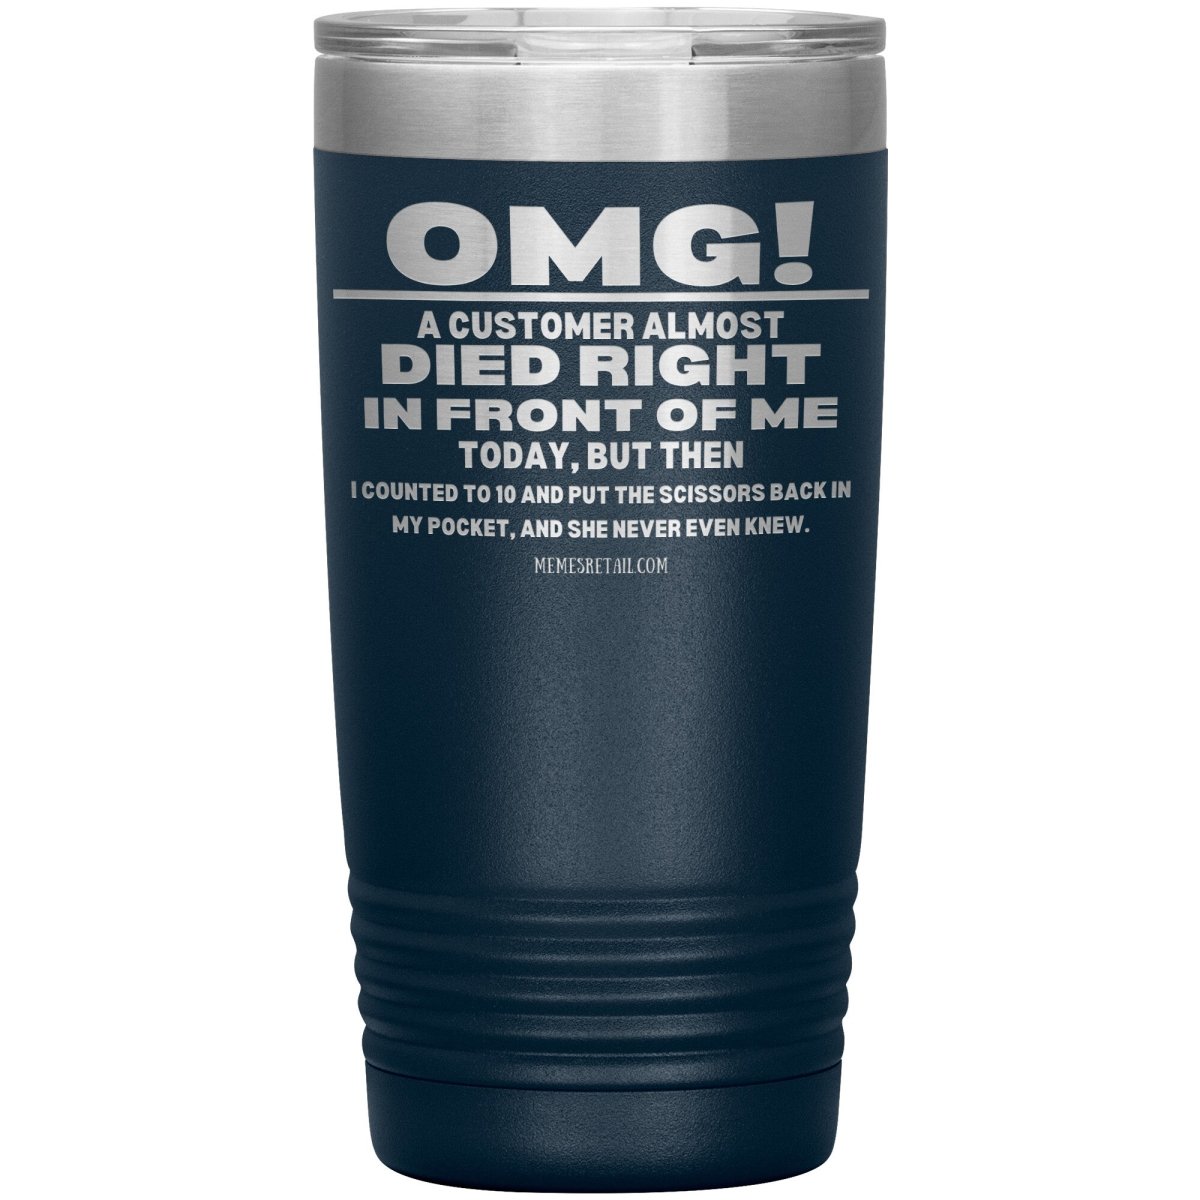 OMG! A Customer Almost Died Right In Front Of Me Tumbler, 20oz Insulated Tumbler / Navy - MemesRetail.com